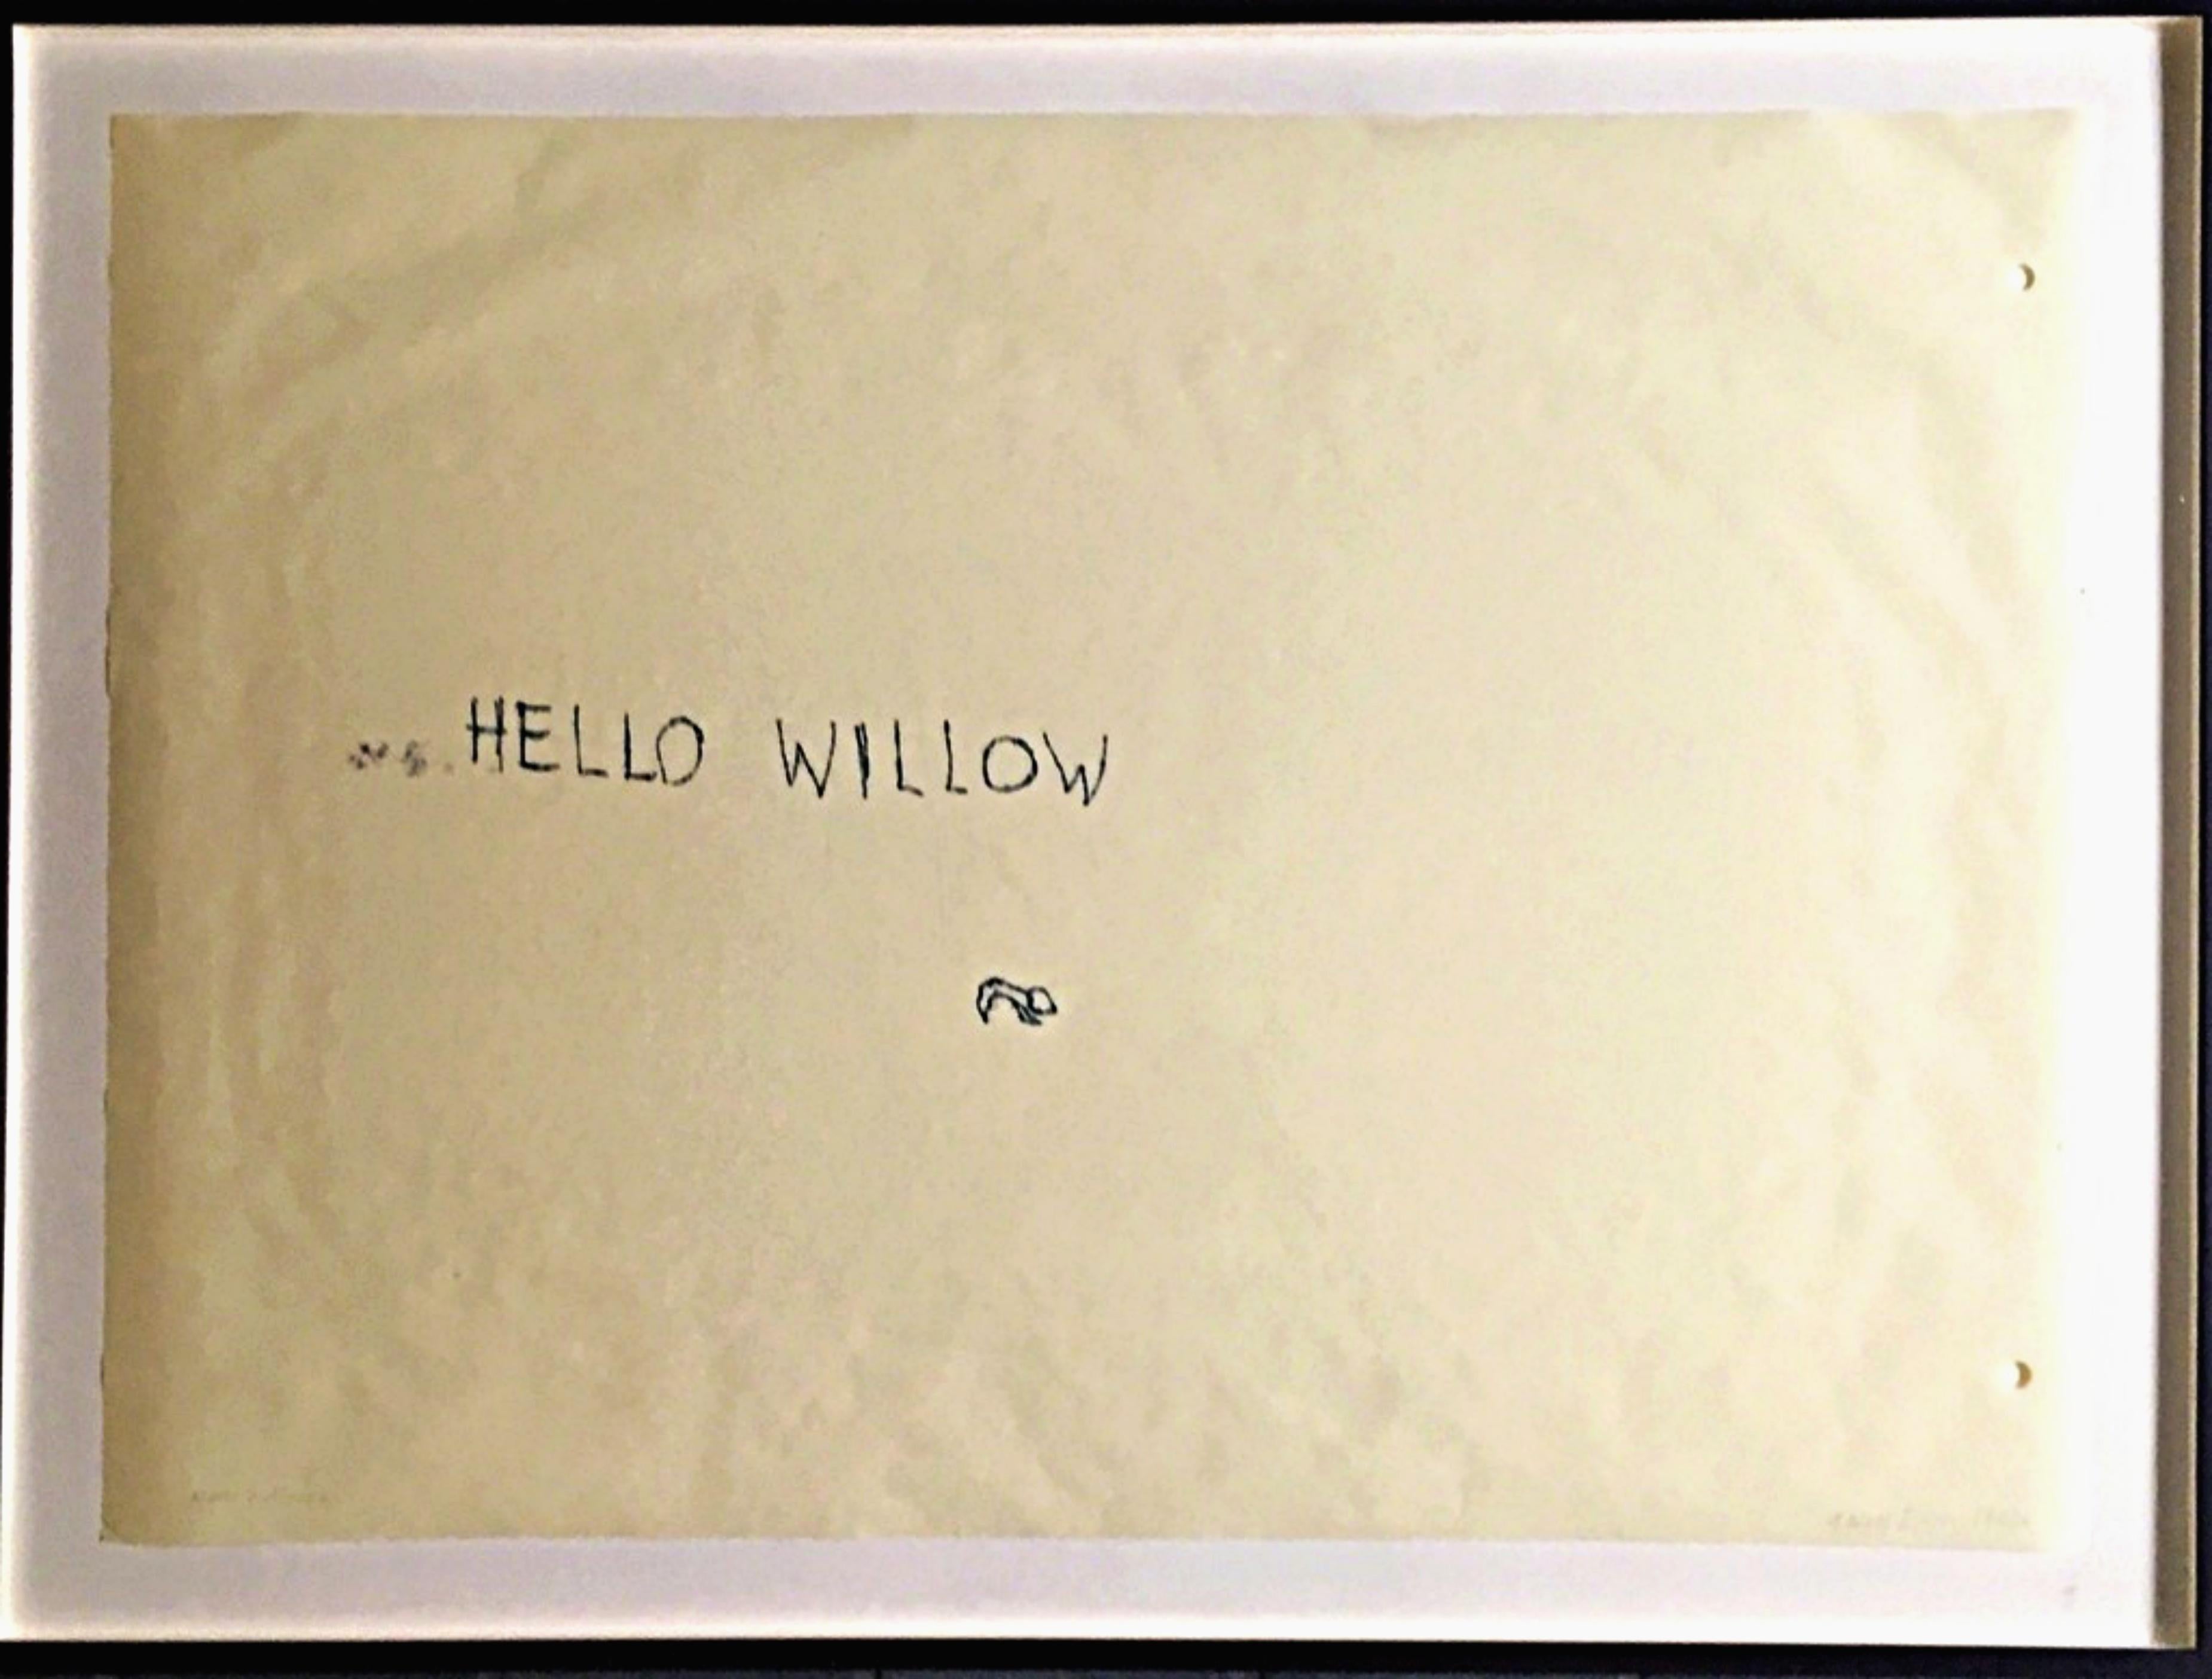 Tracey Emin Abstract Print - Hello Willow, signed monotype (unique), from the Tim Hunt and Tama Janowitz sale